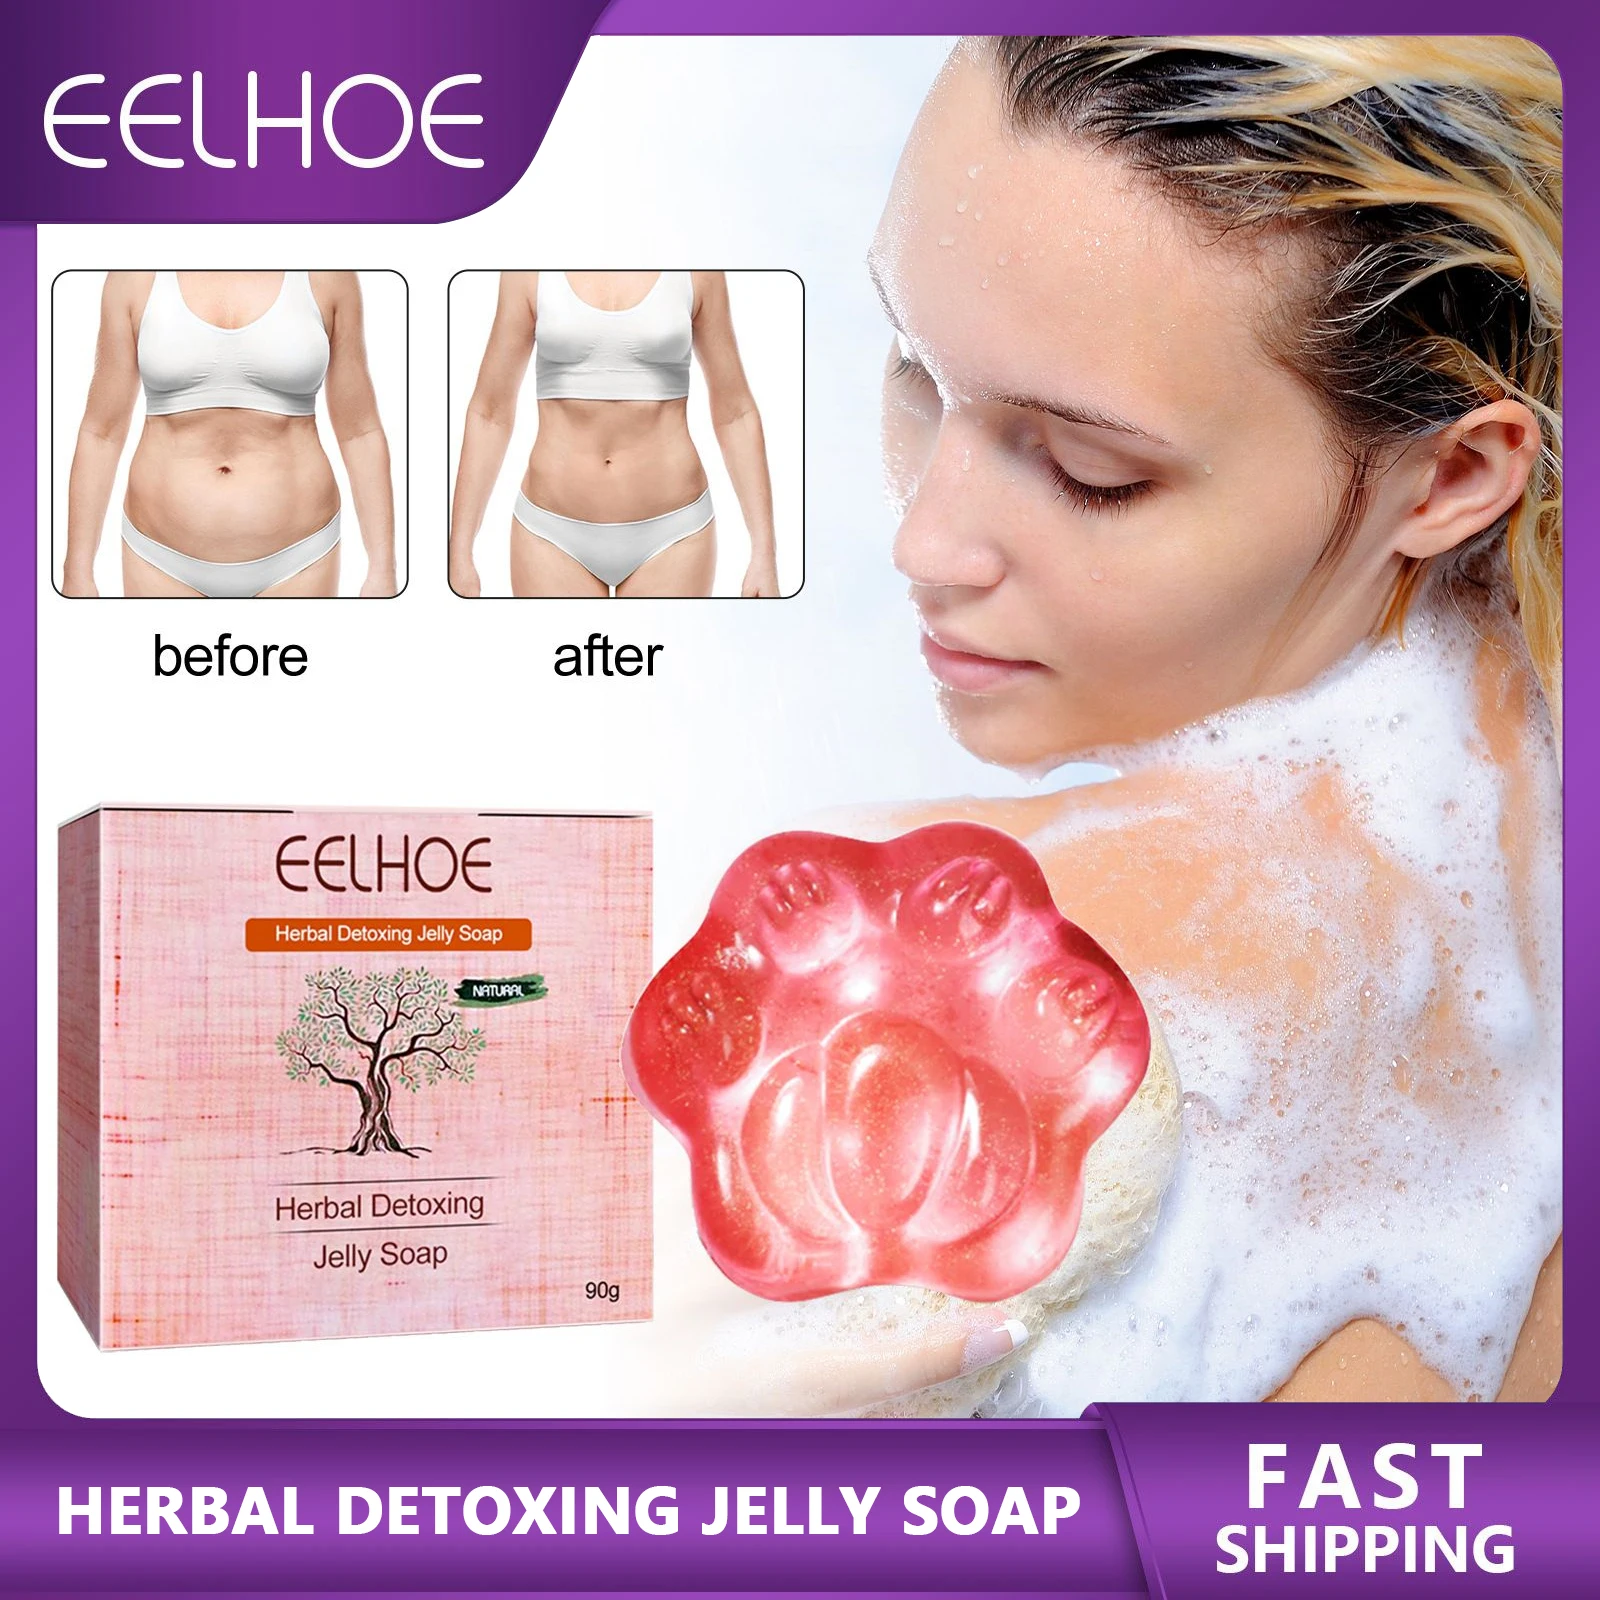 

Herbal Slimming Jelly Soap Detox Weight Loss Fat Burning Belly Waist Firming Skin Moisturizing Cleaning Body Shaping Bath Soap